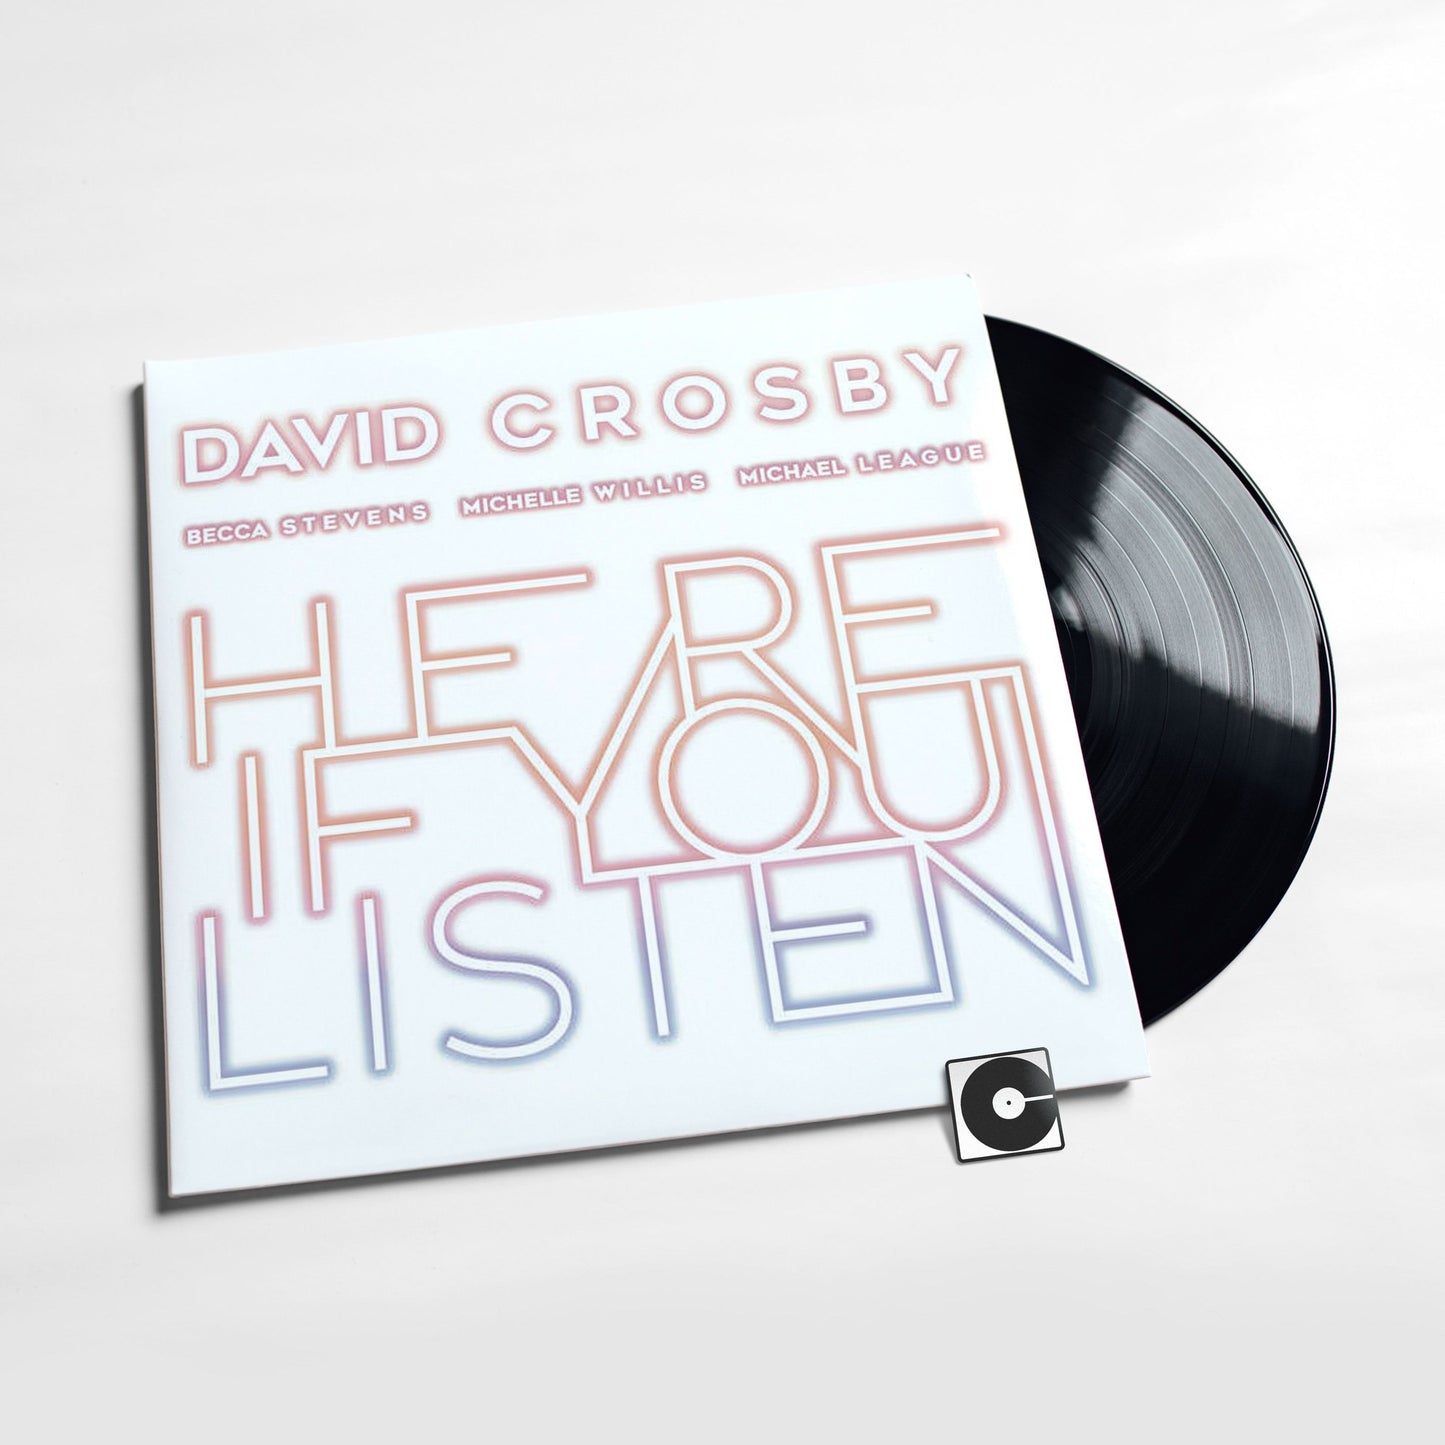 David Crosby - "Here If You Listen"